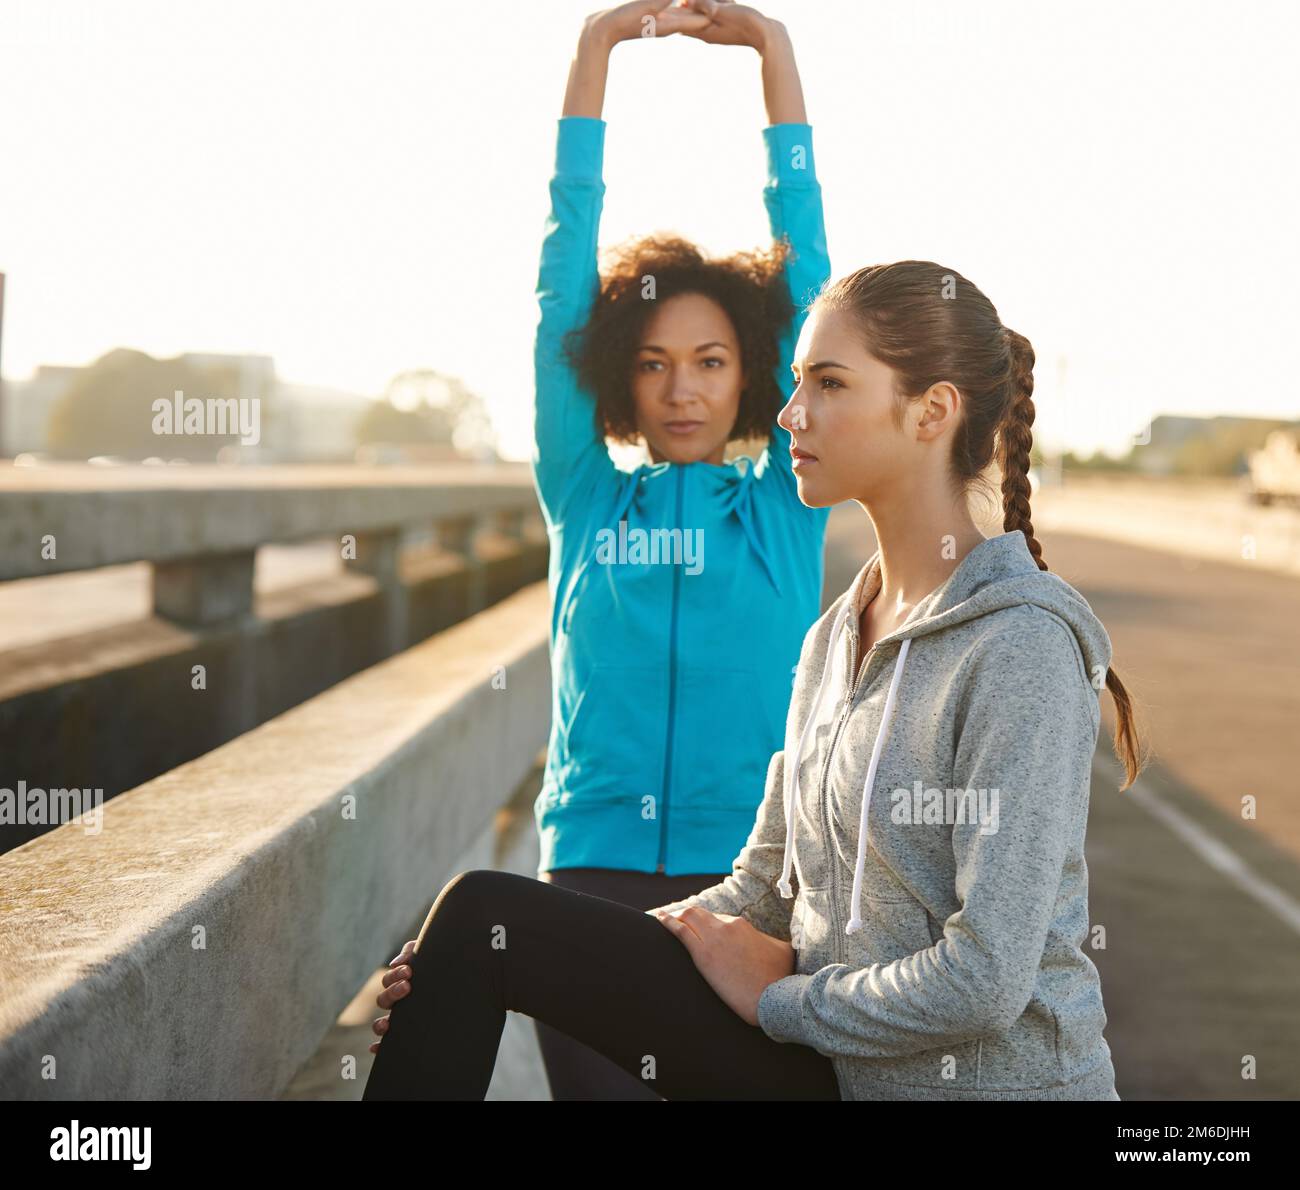 Limbering up for a run. two friends stretching together before a run through the city streets. Stock Photo